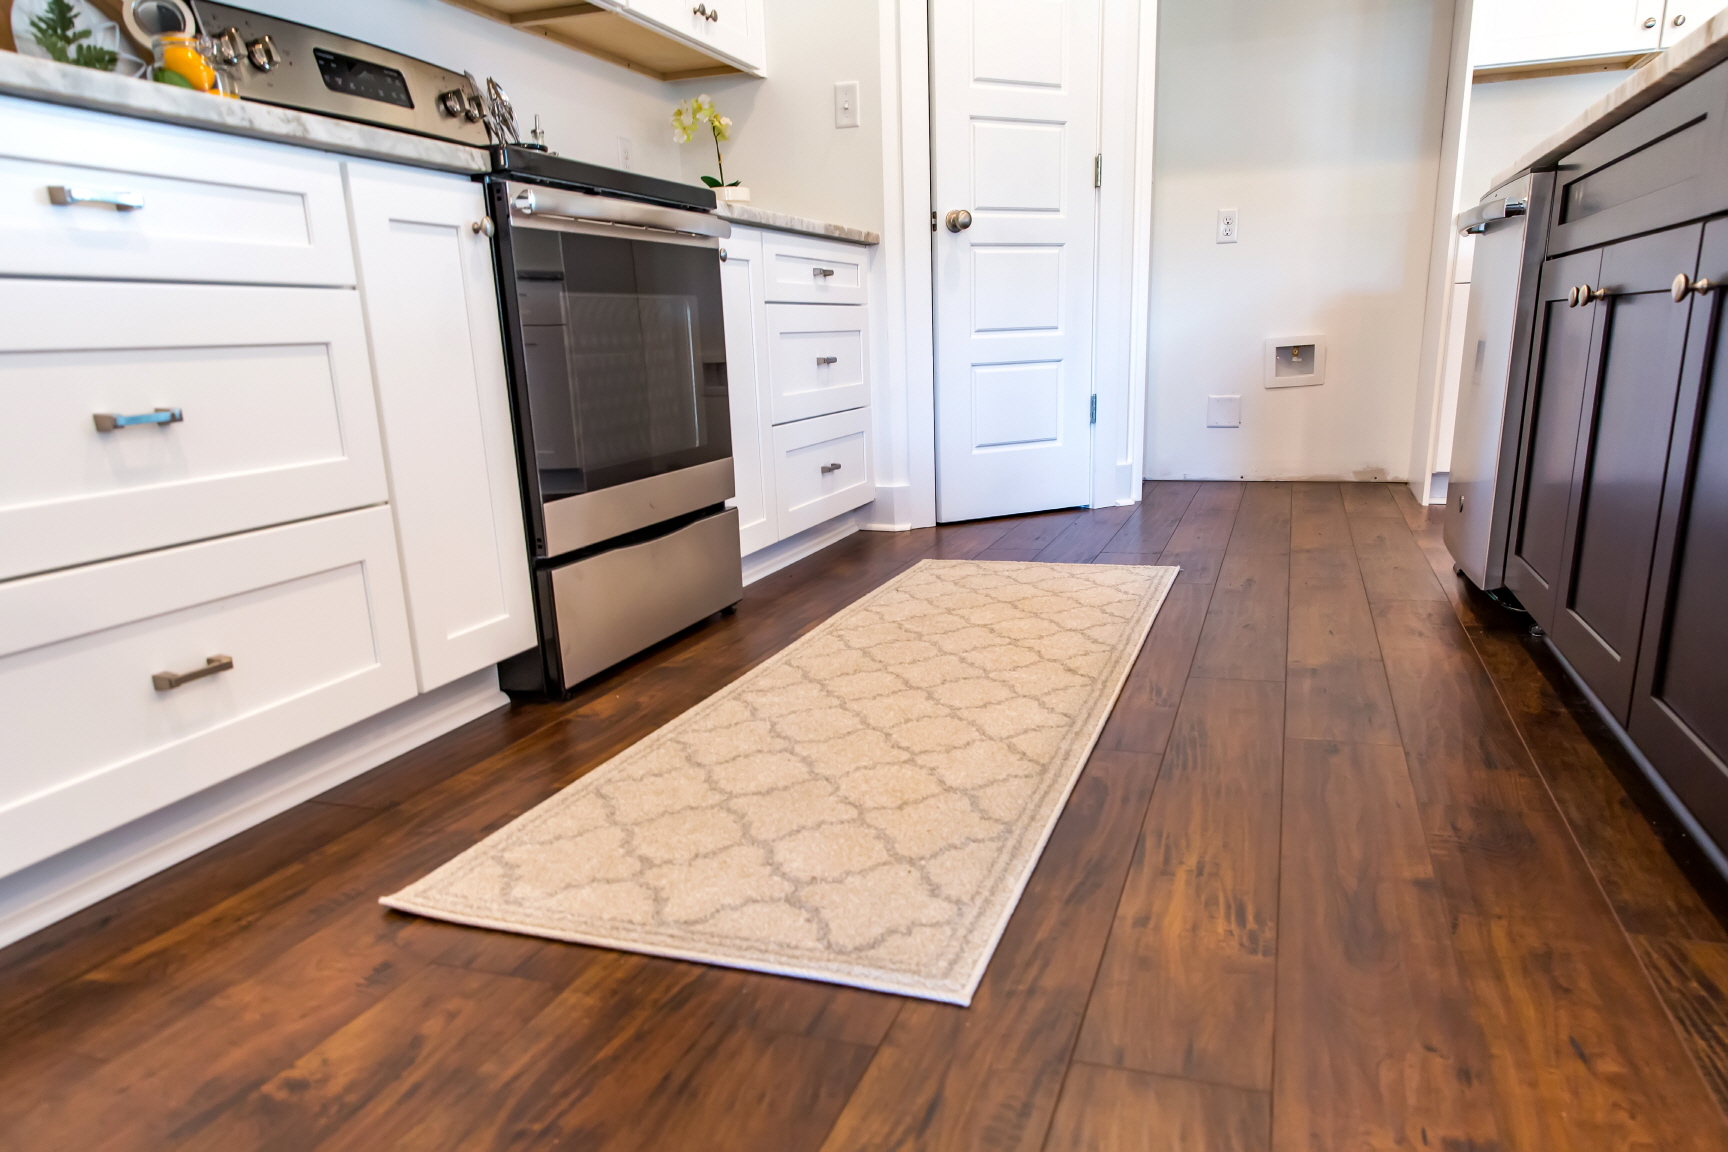 LX Hausys flooring with a vibrant rug instantly adds warmth and style to the kitchen.